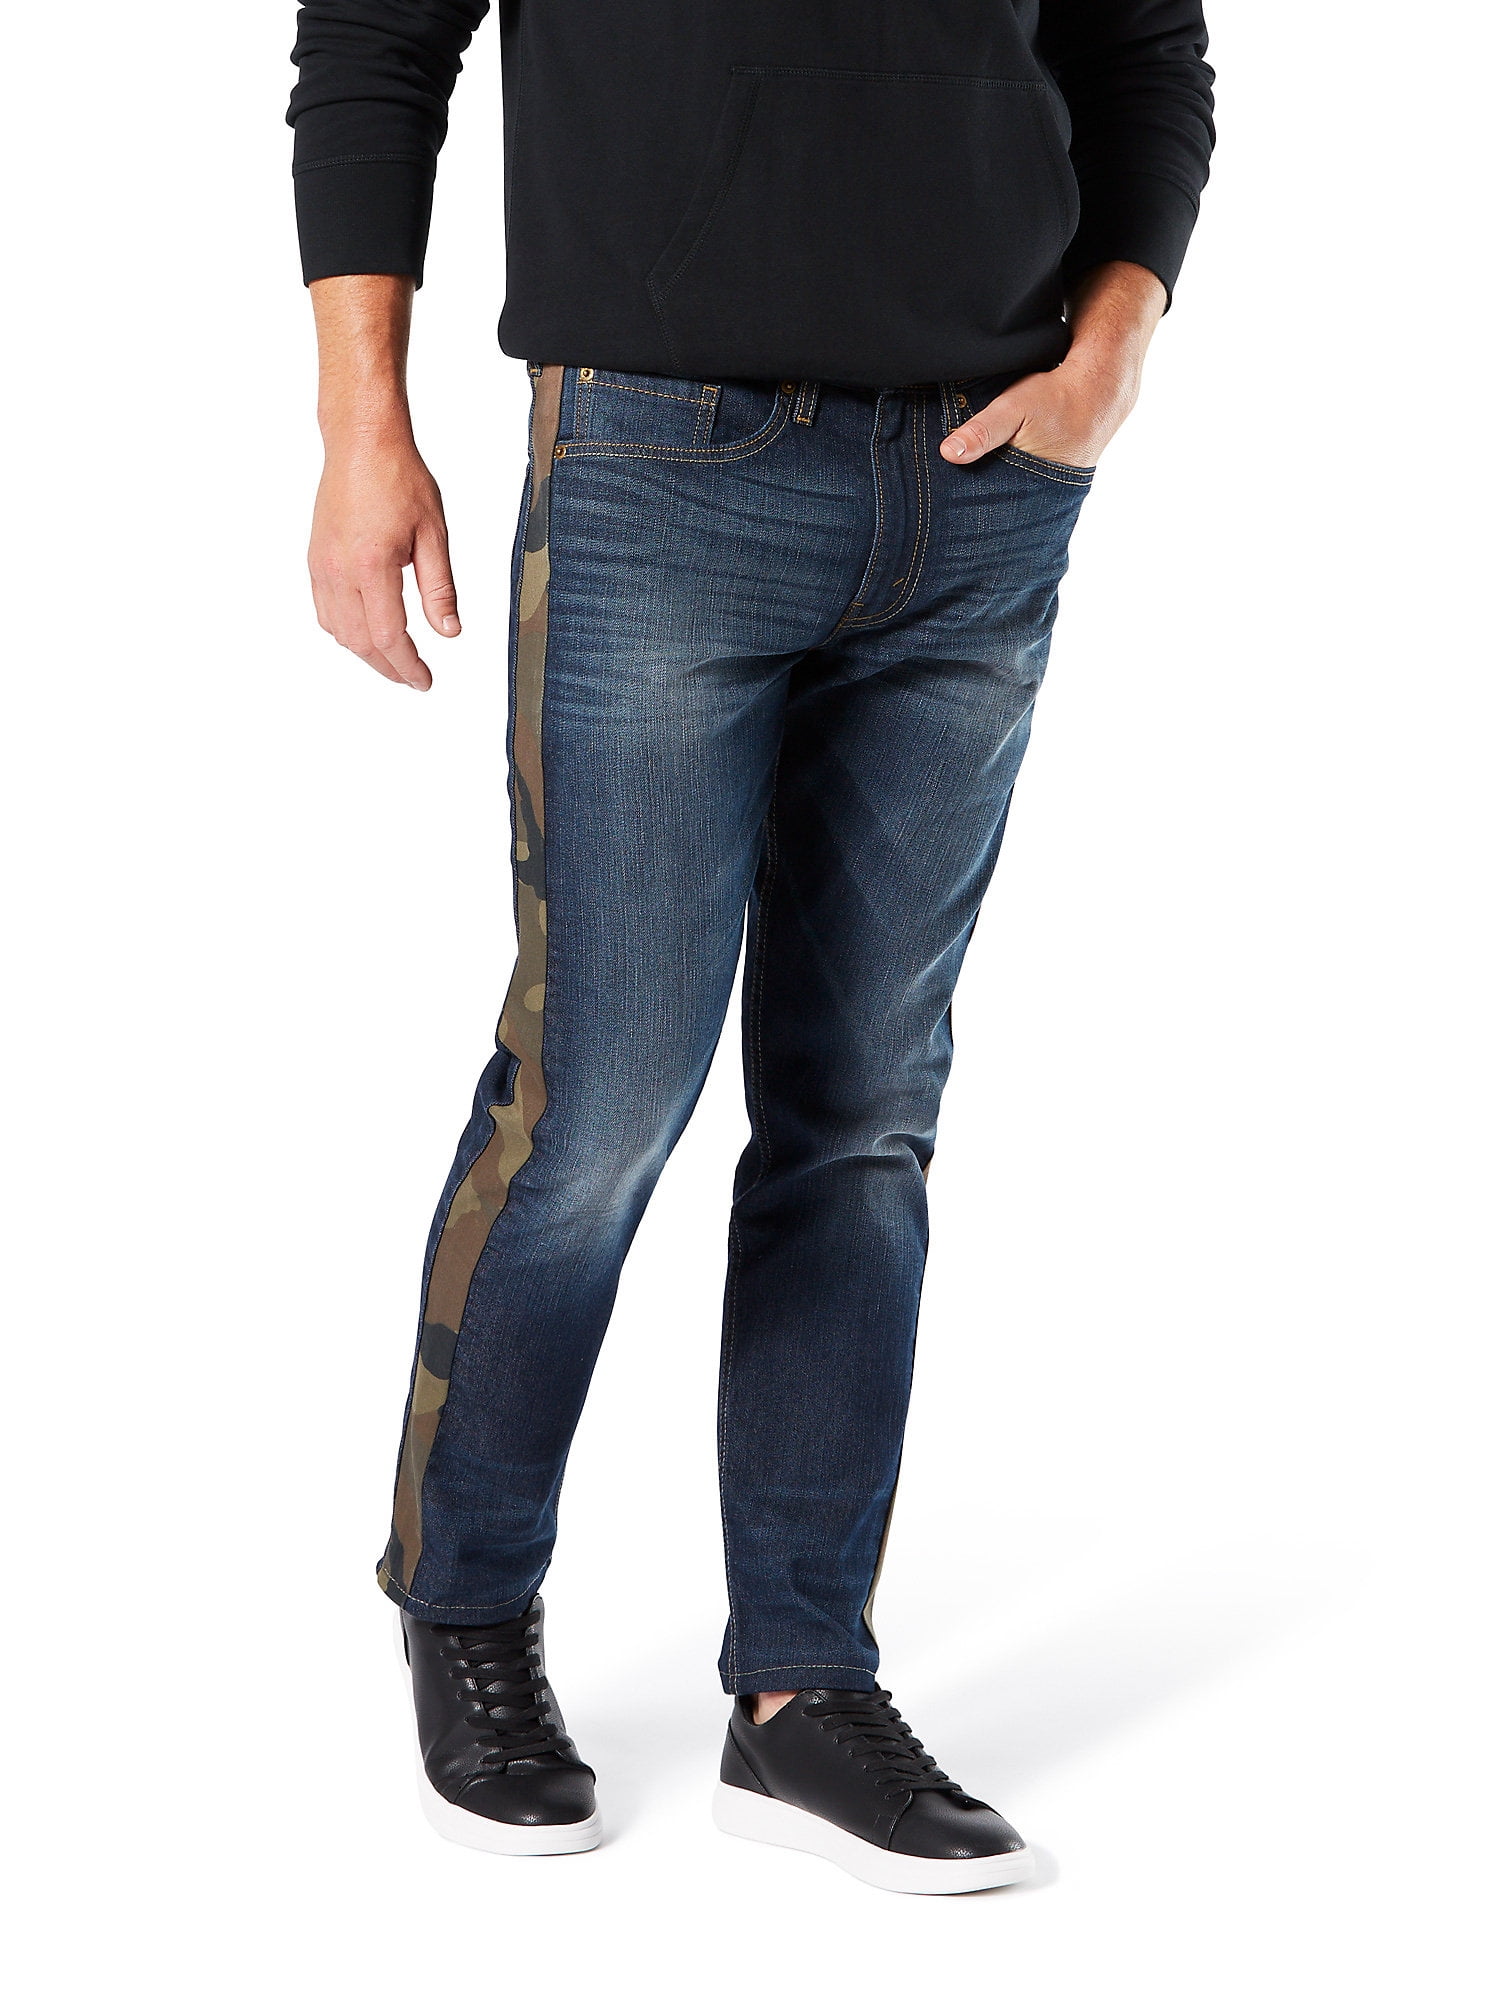 tapering jeans cost